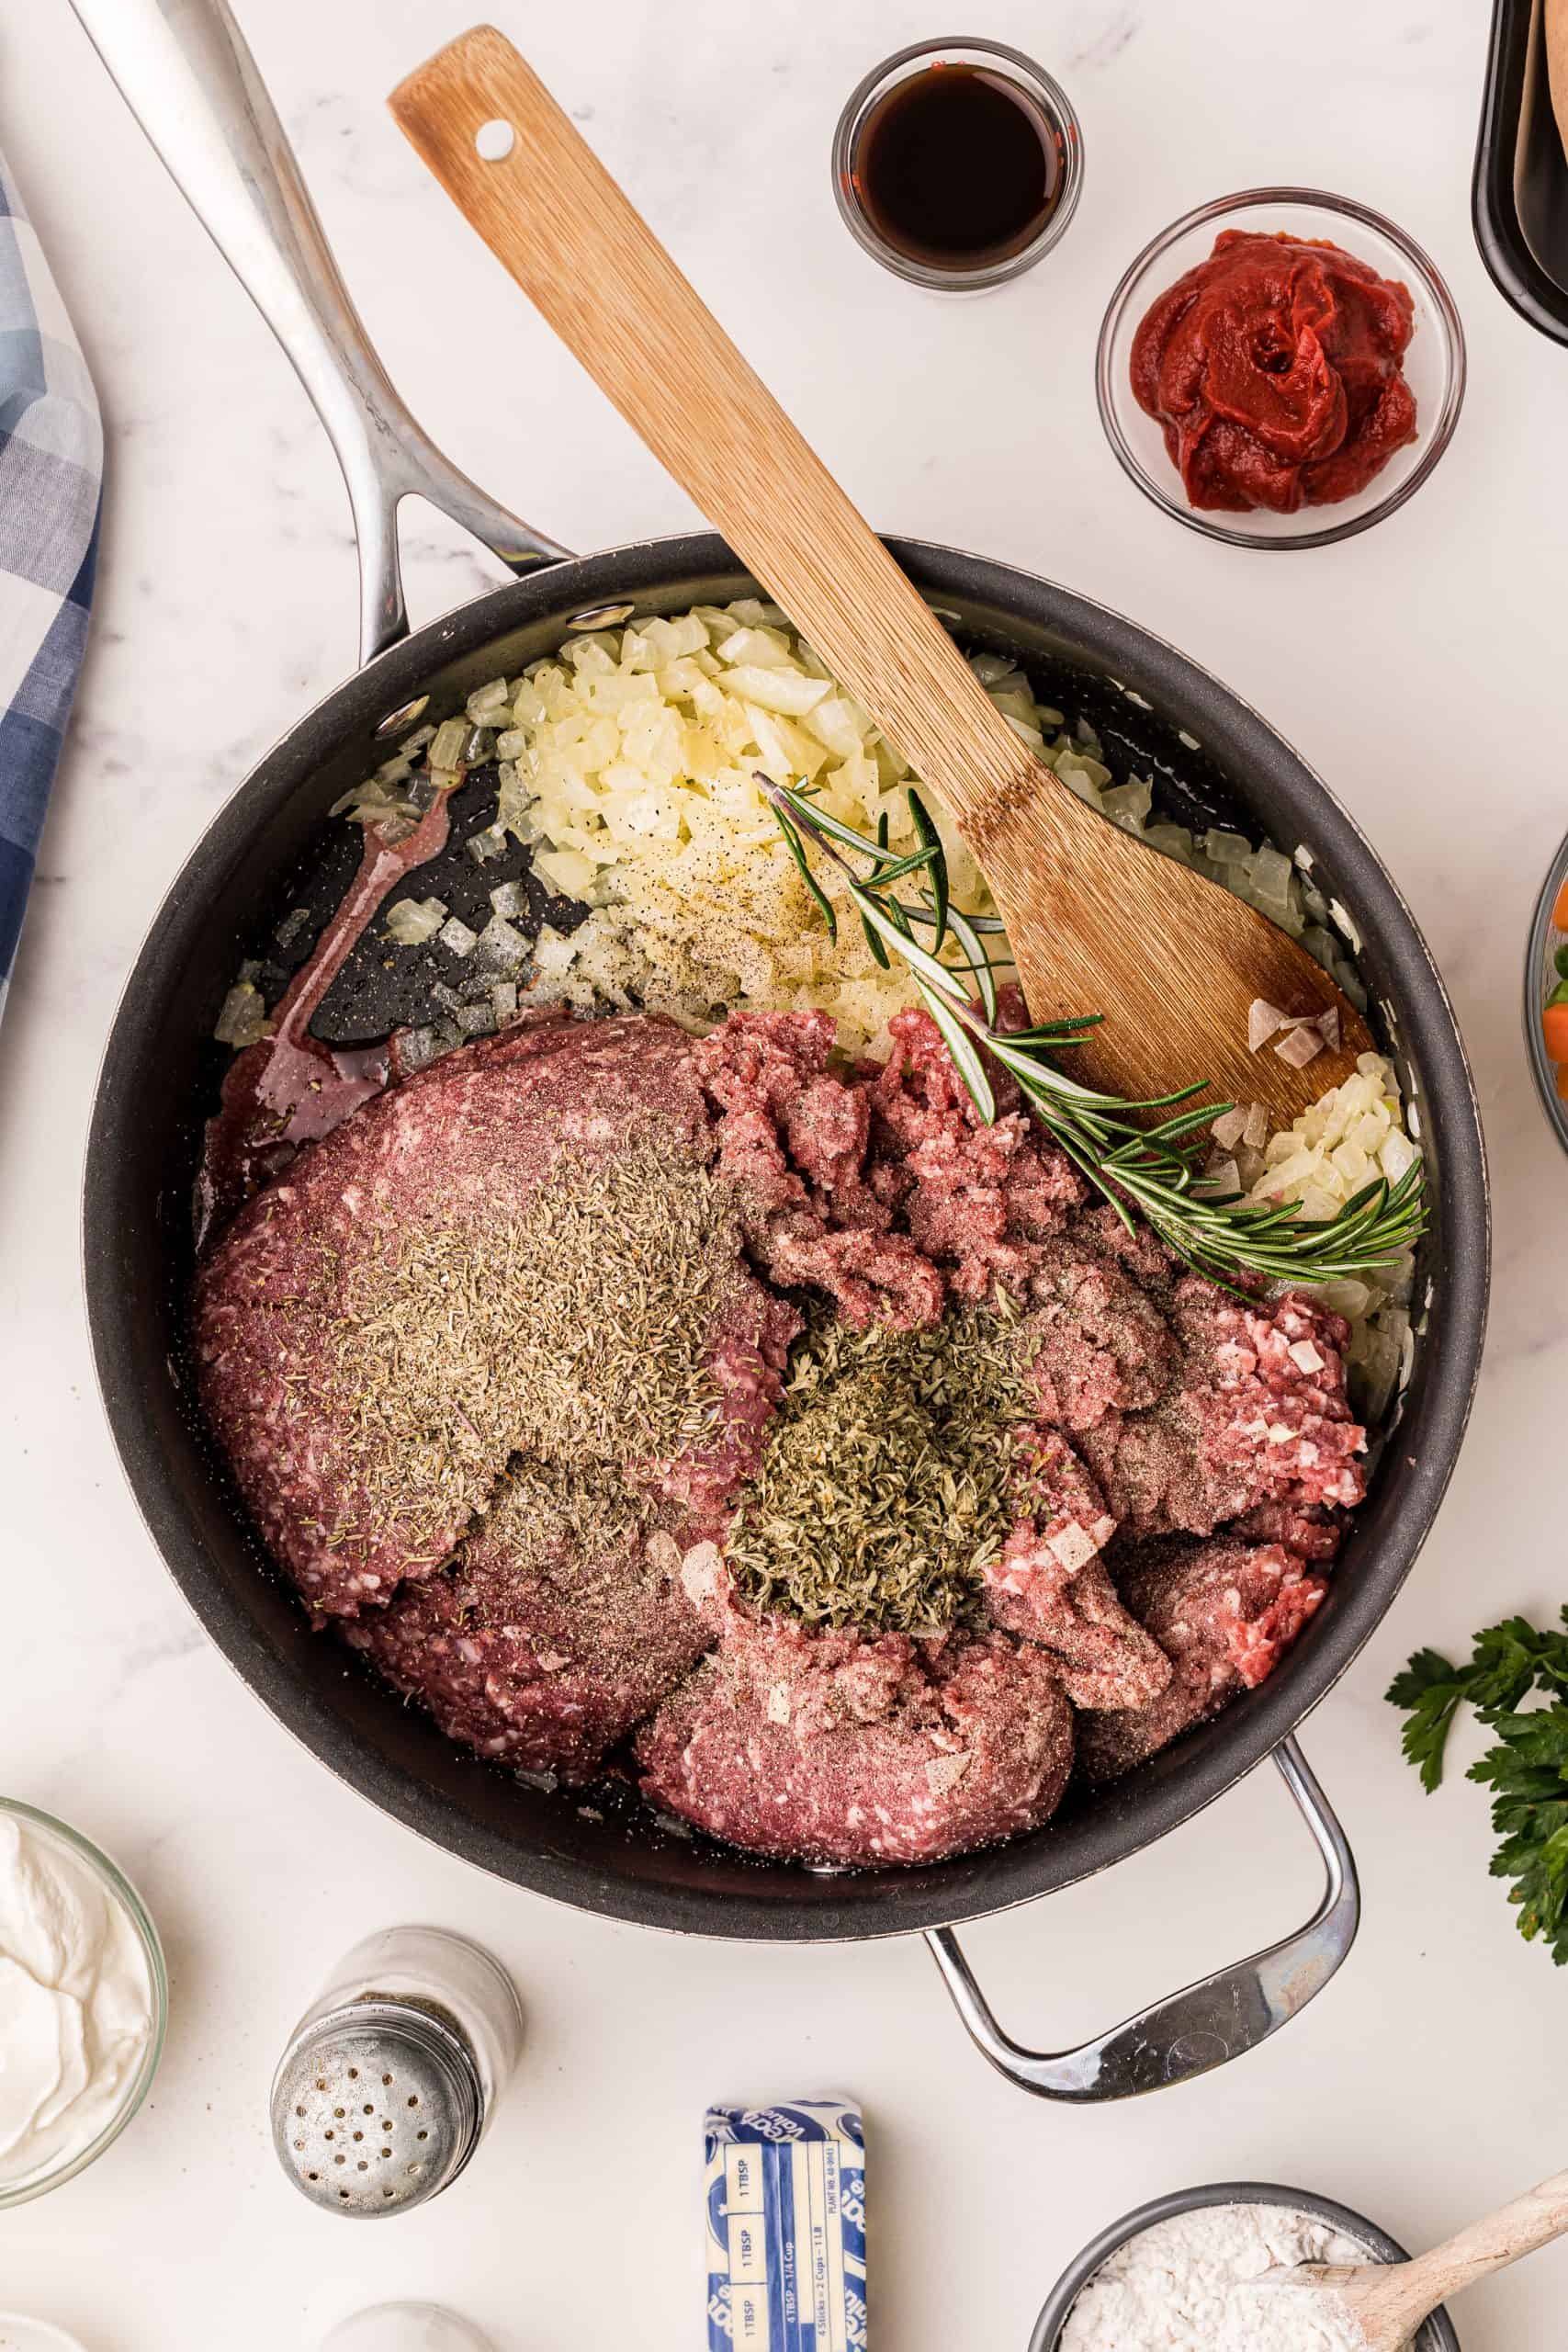 Ground meat and herbs added to onions in a skillet.